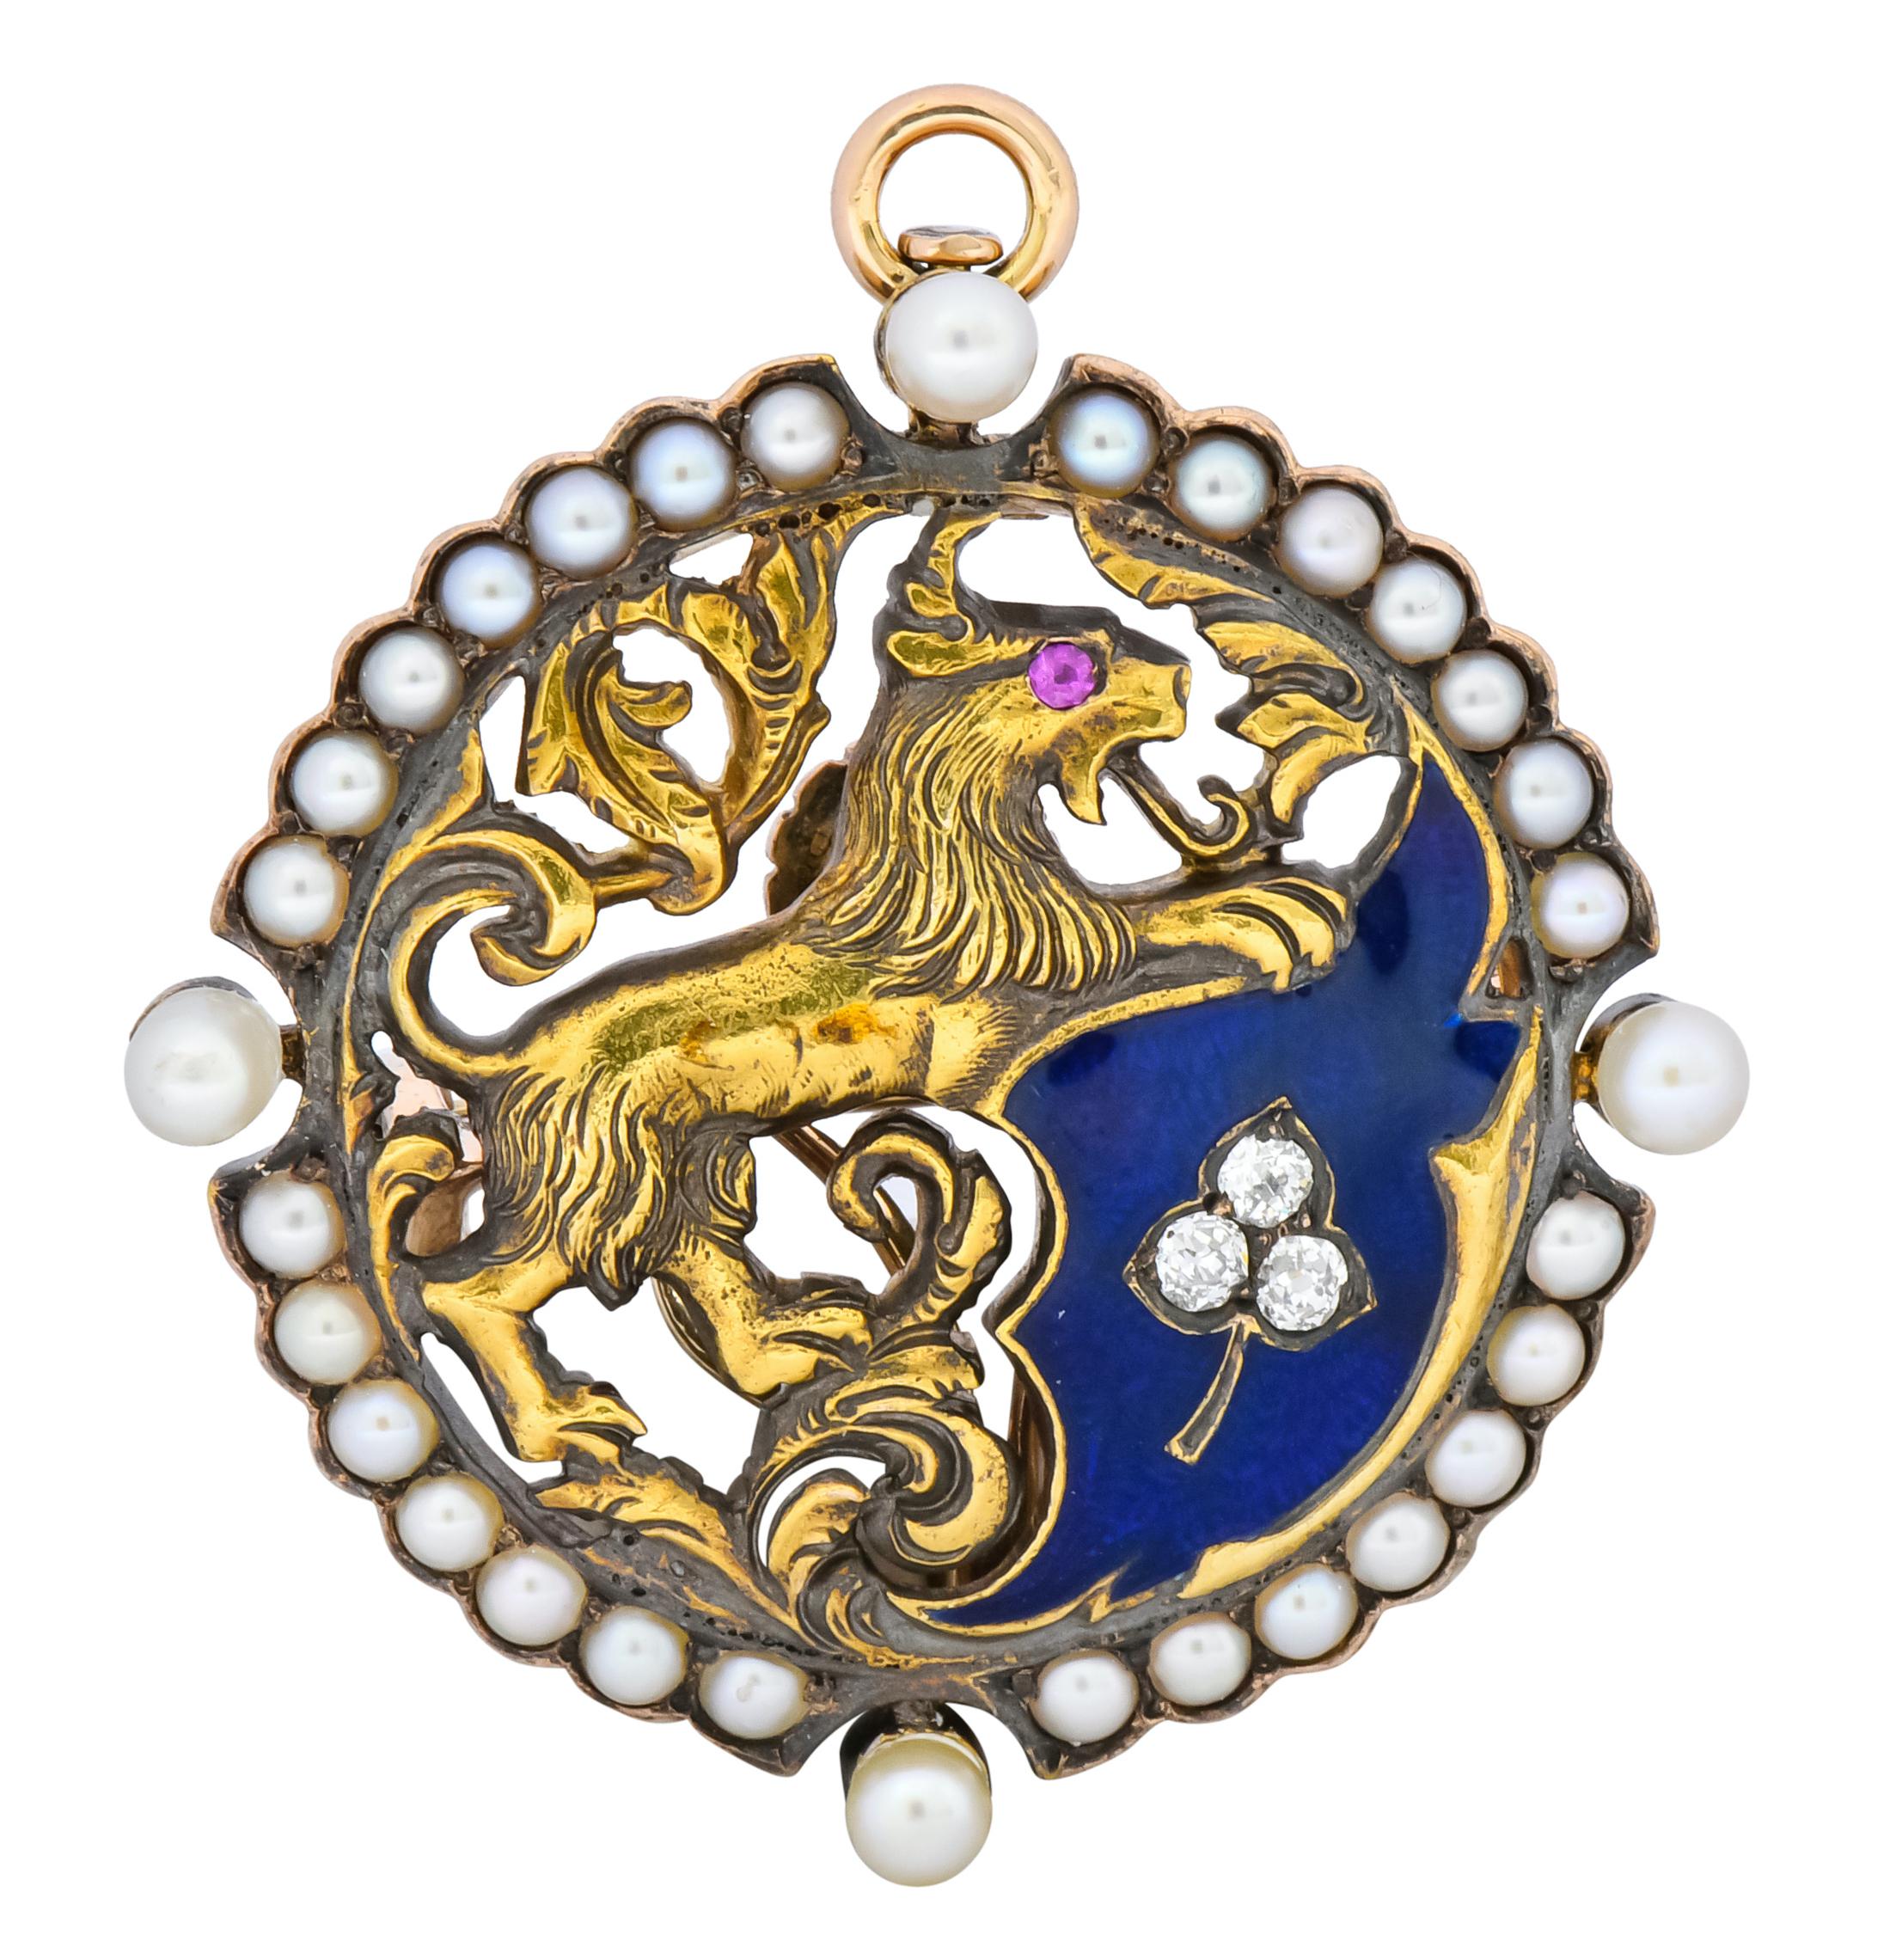 Featuring a 14 karat gold setting containing a stylized lion in reared stance with whiplash and foliate detail

Blue enamel field with three bead set old mine cut diamonds within a leaf motif

With a ruby accent for the lion’s eye and four round